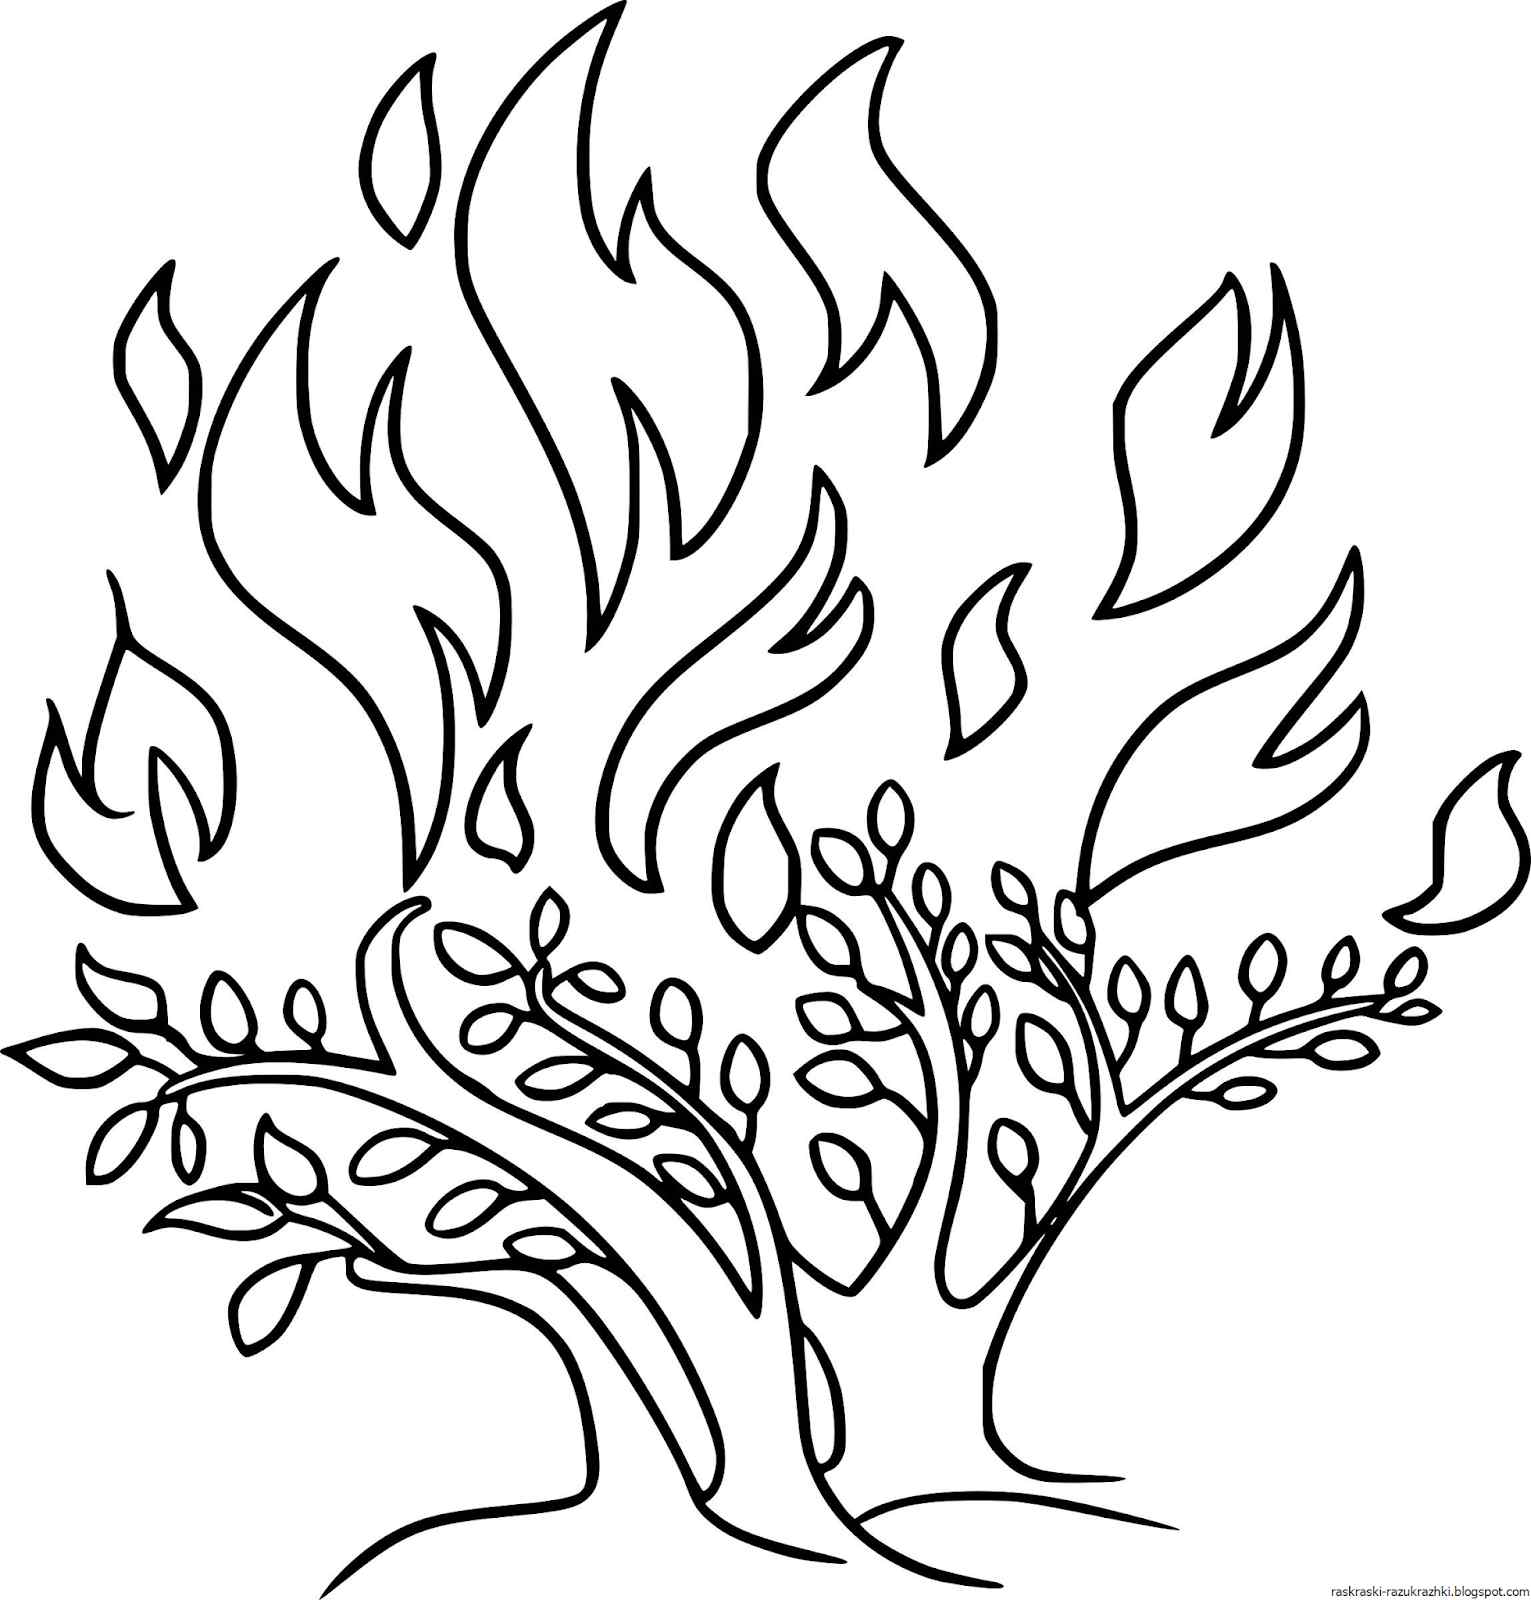 Coloring for the burning bush for the little ones